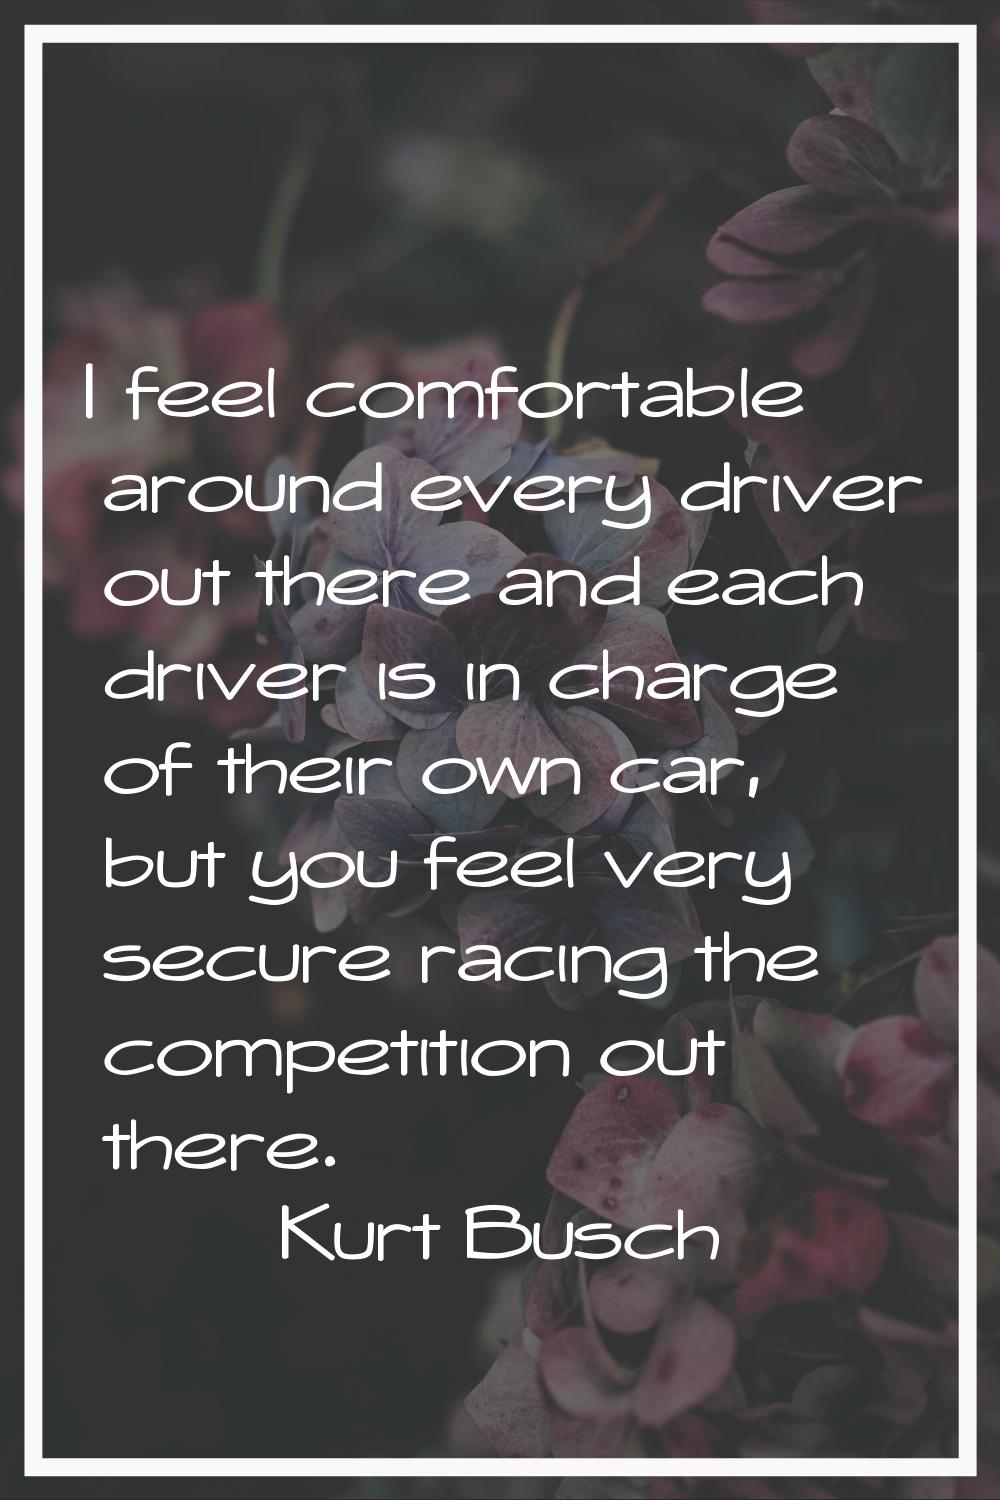 I feel comfortable around every driver out there and each driver is in charge of their own car, but